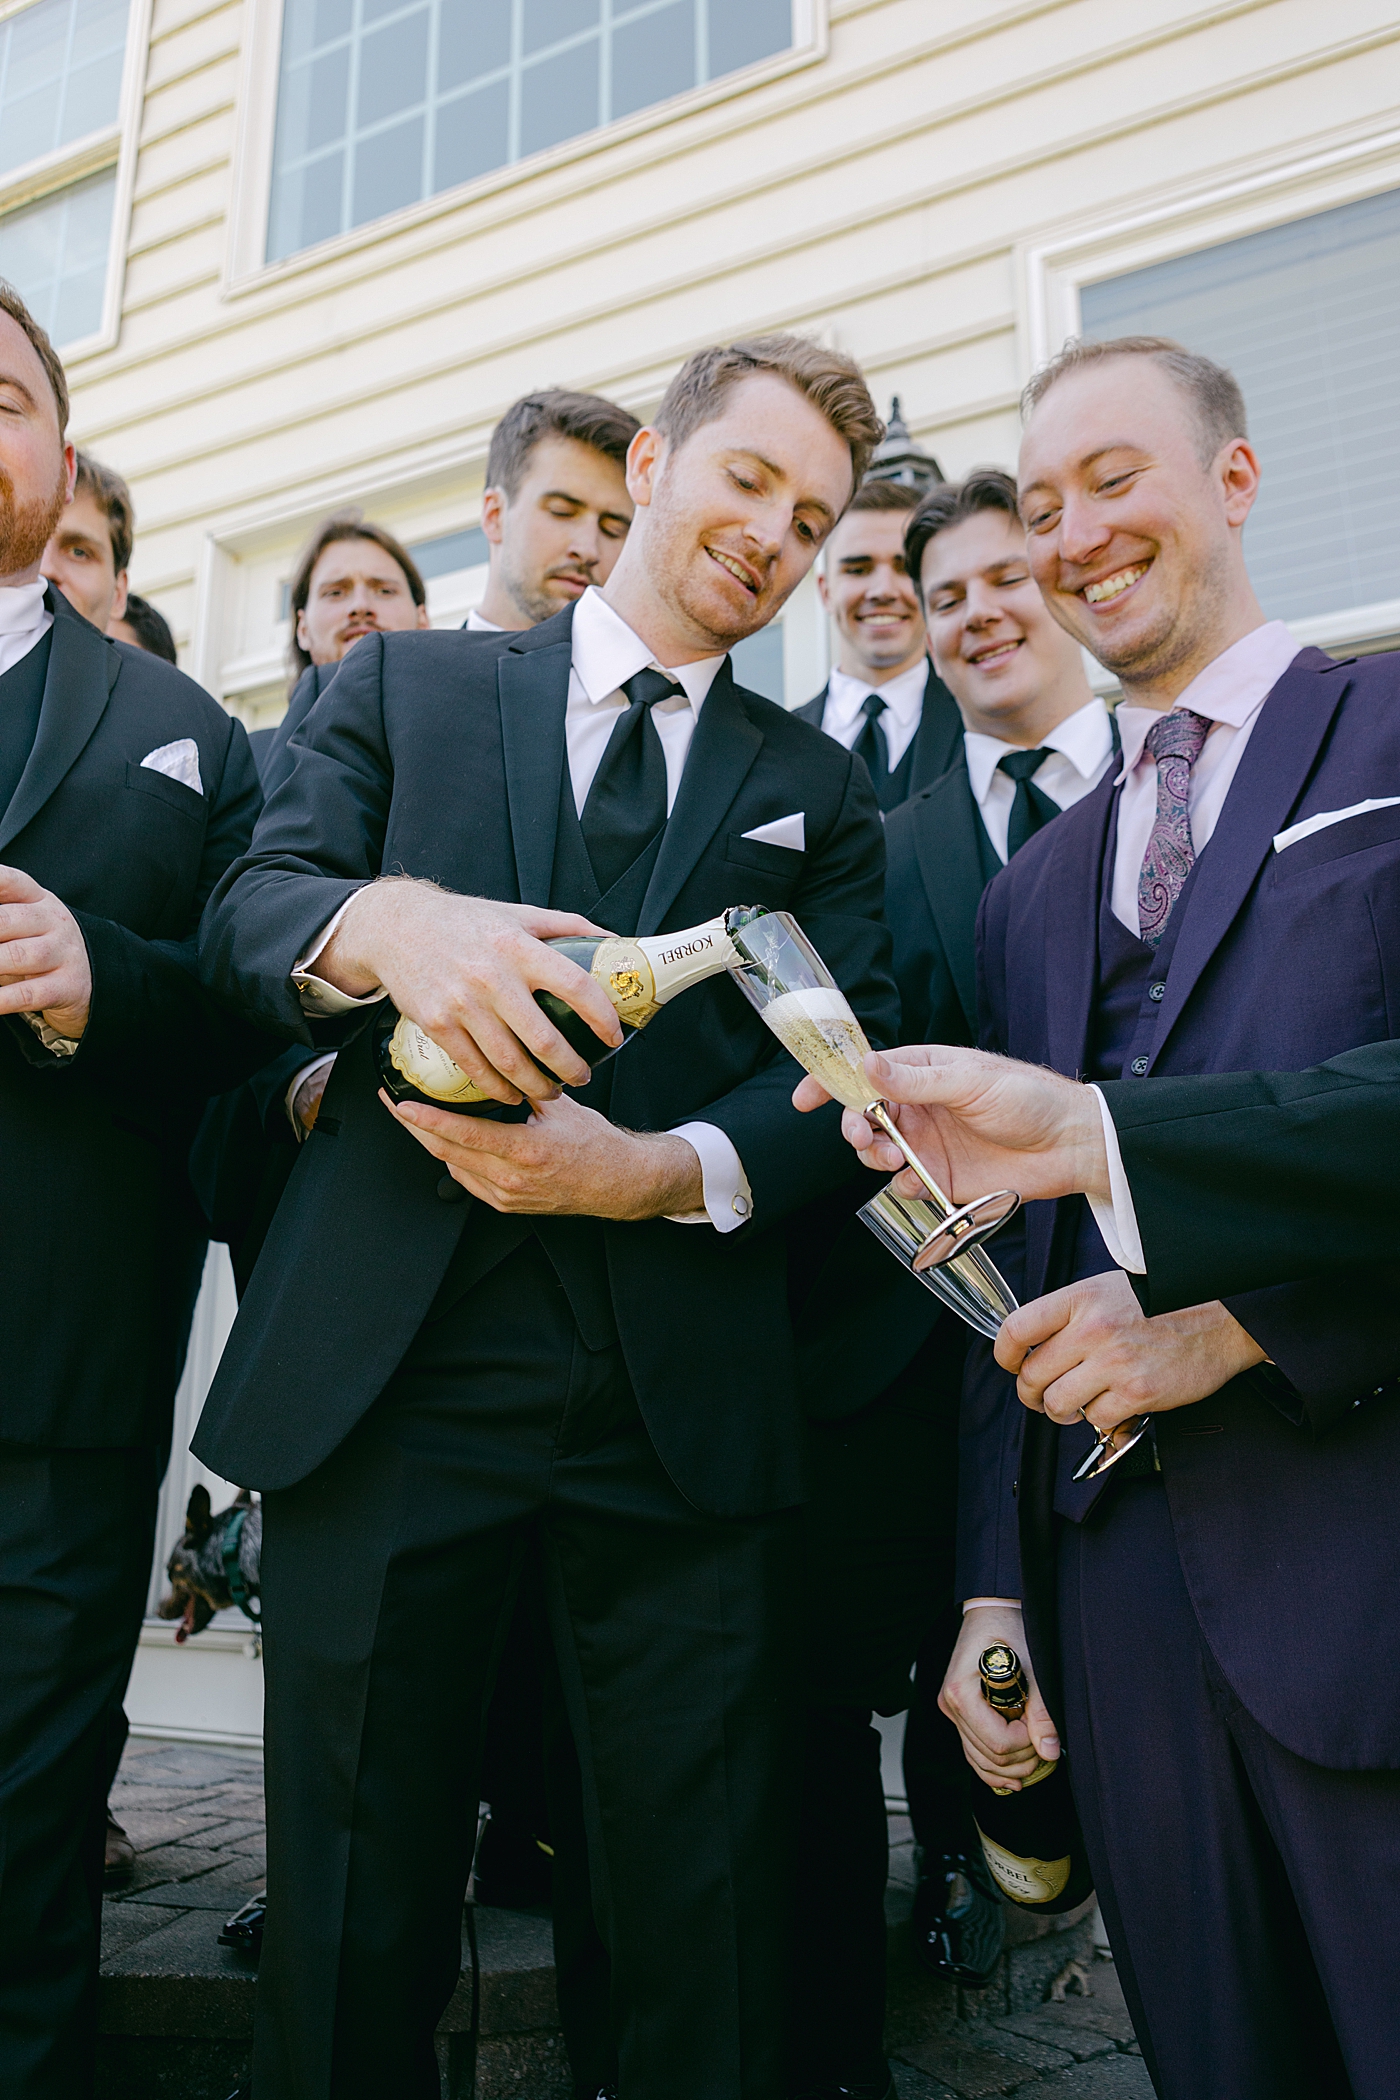 Groom pouring champagne with groomsmen during Tyler Gardens Wedding| Image by Hope Helmuth Photography